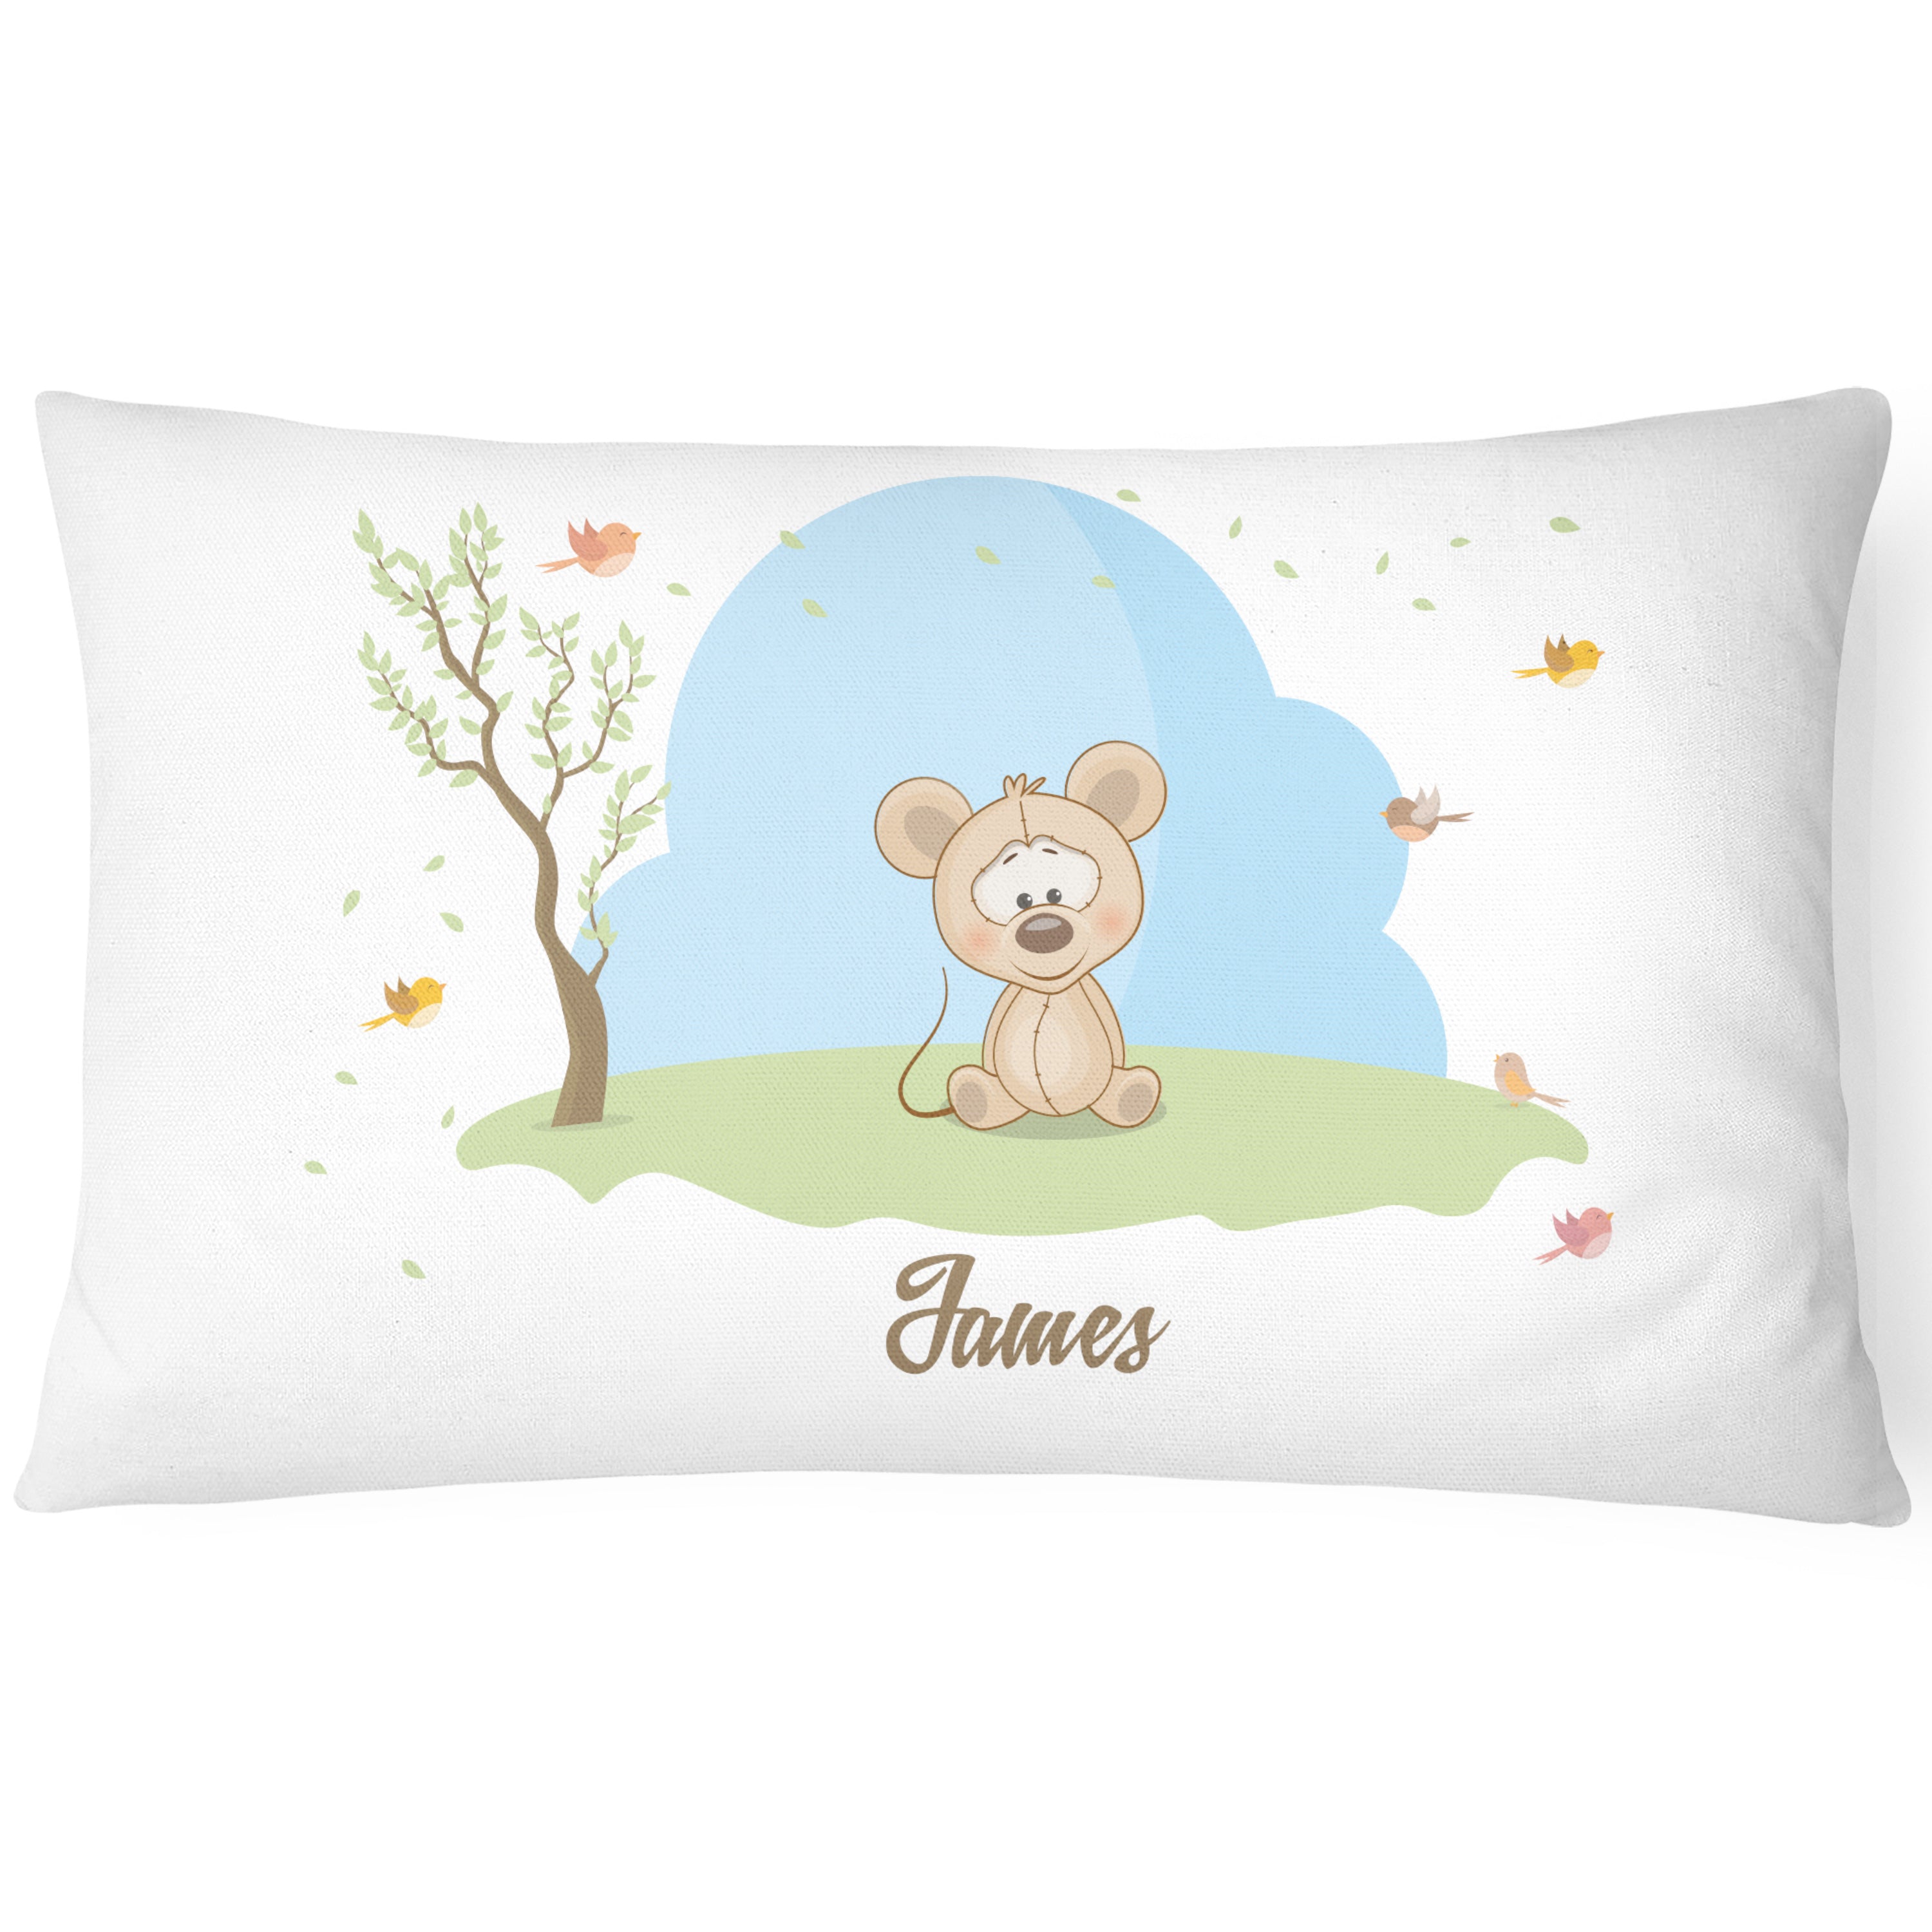 Personalised Children's Pillowcase Cute Animal - Winsome